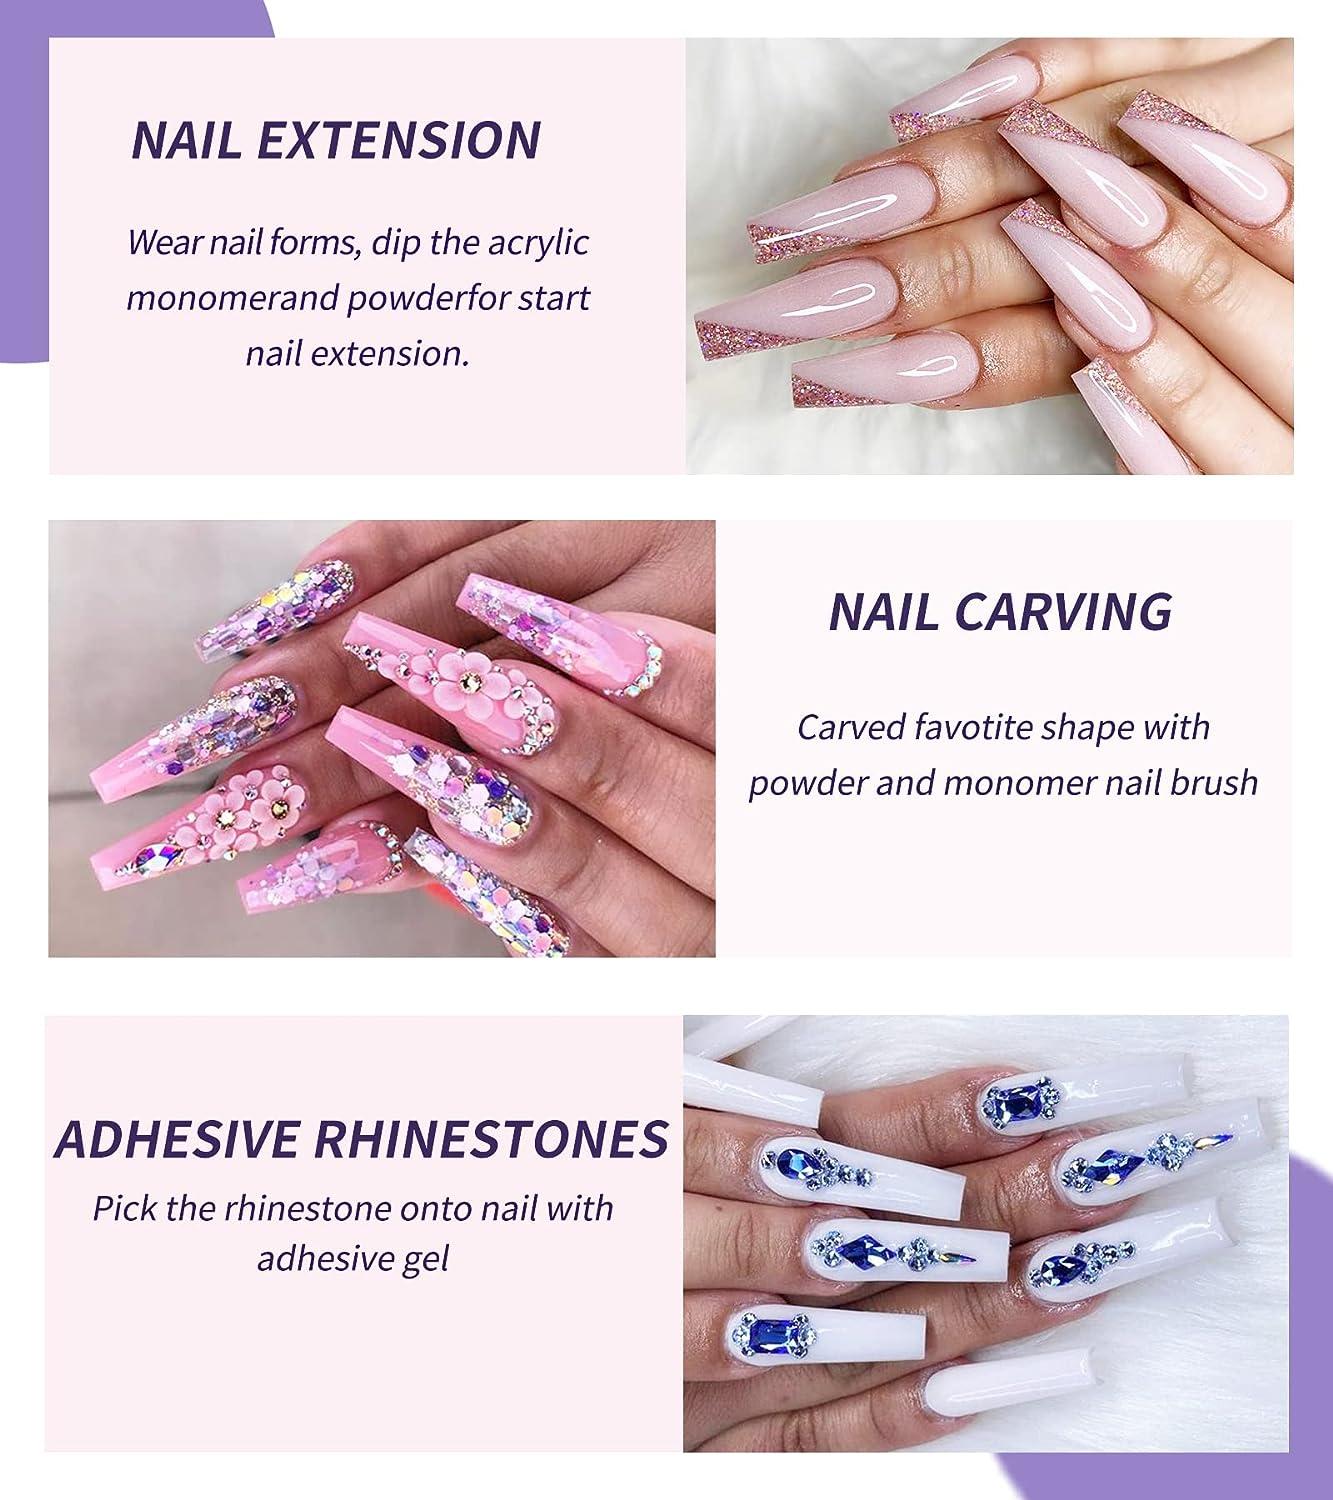 Complete Acrylic Nail Kit For Beginners - Clear Pink Nude Acrylic Powder,  Professional Nails Kit Acrylic Set Manicure Tools Acrylic Supplies Gift For